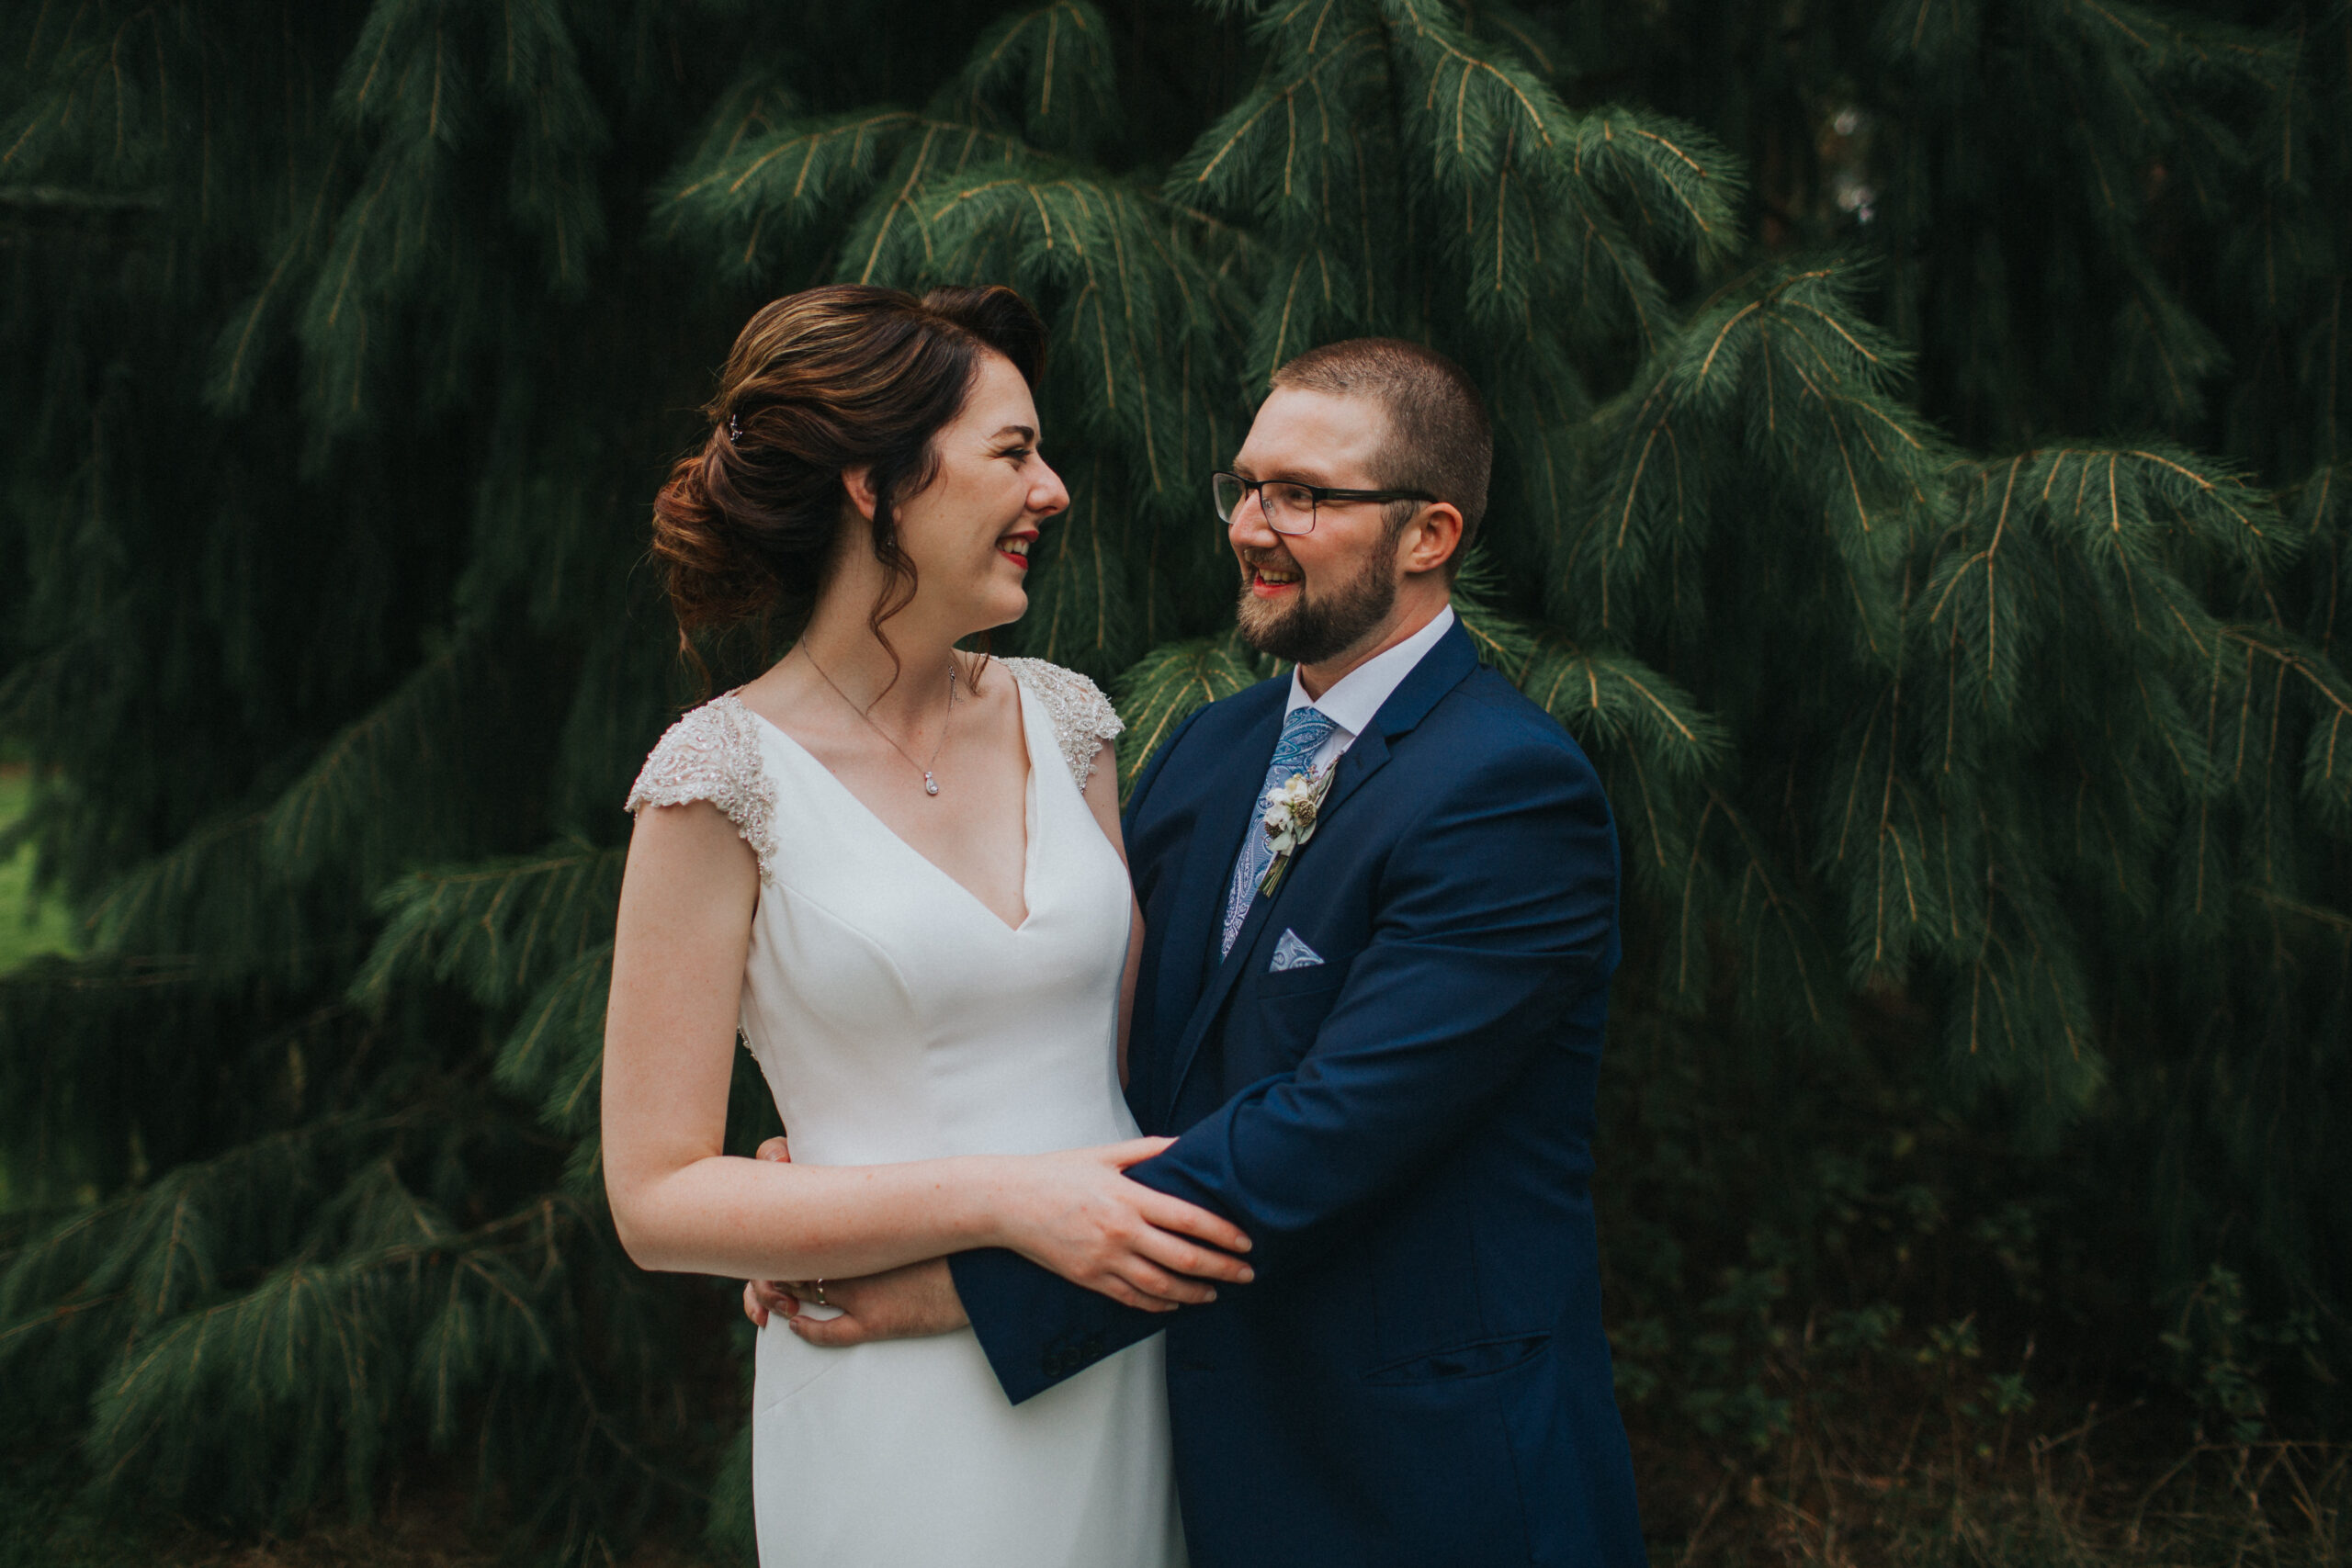 Heartwarming moments of love and connection at the summer wedding